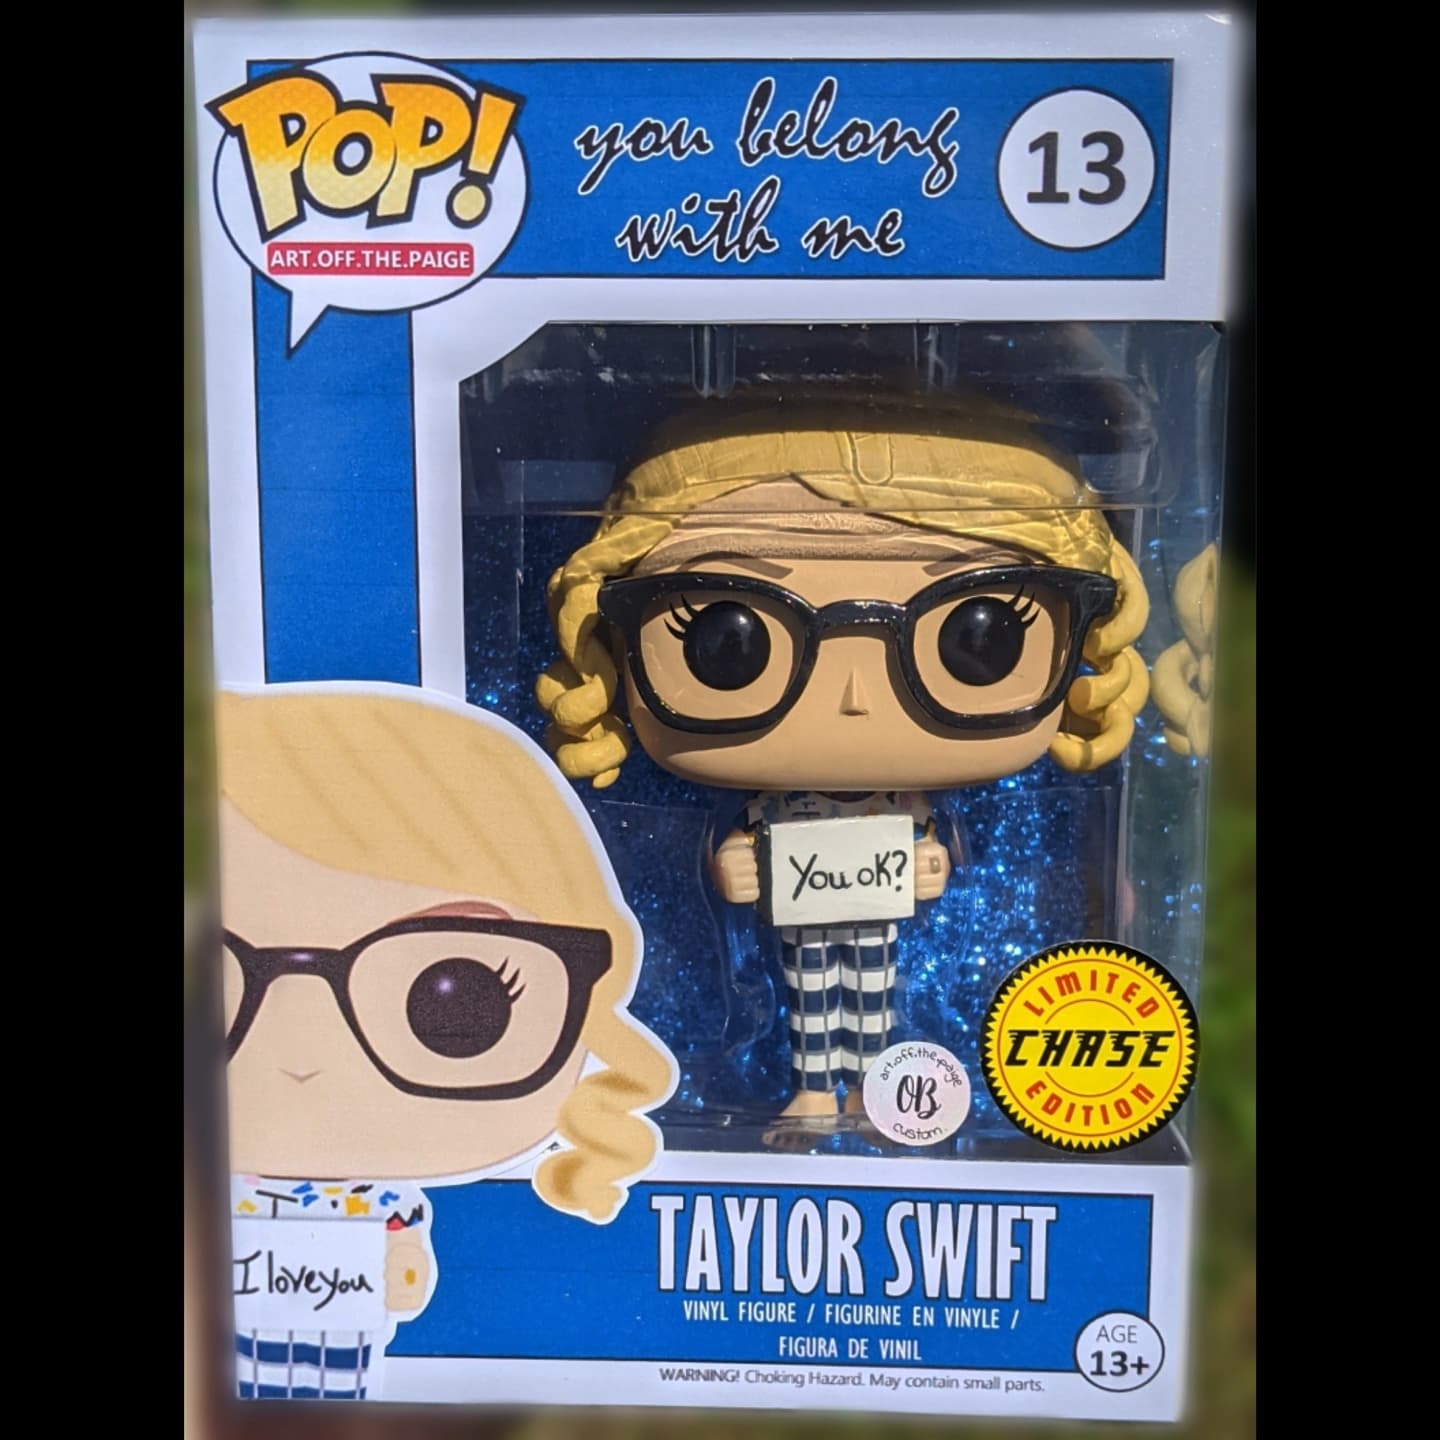 art.off.the.paige / Olivia on X: Taylor Swift You Belong With Me Custom Funko  Pop Chase Edition💛 DM for inquiries 🙂 #taylor #swift #taylorswift  #swiftie #swifties #taylornation #fearless #fearlesstaylorsversion #vault  #art #artist #paint #